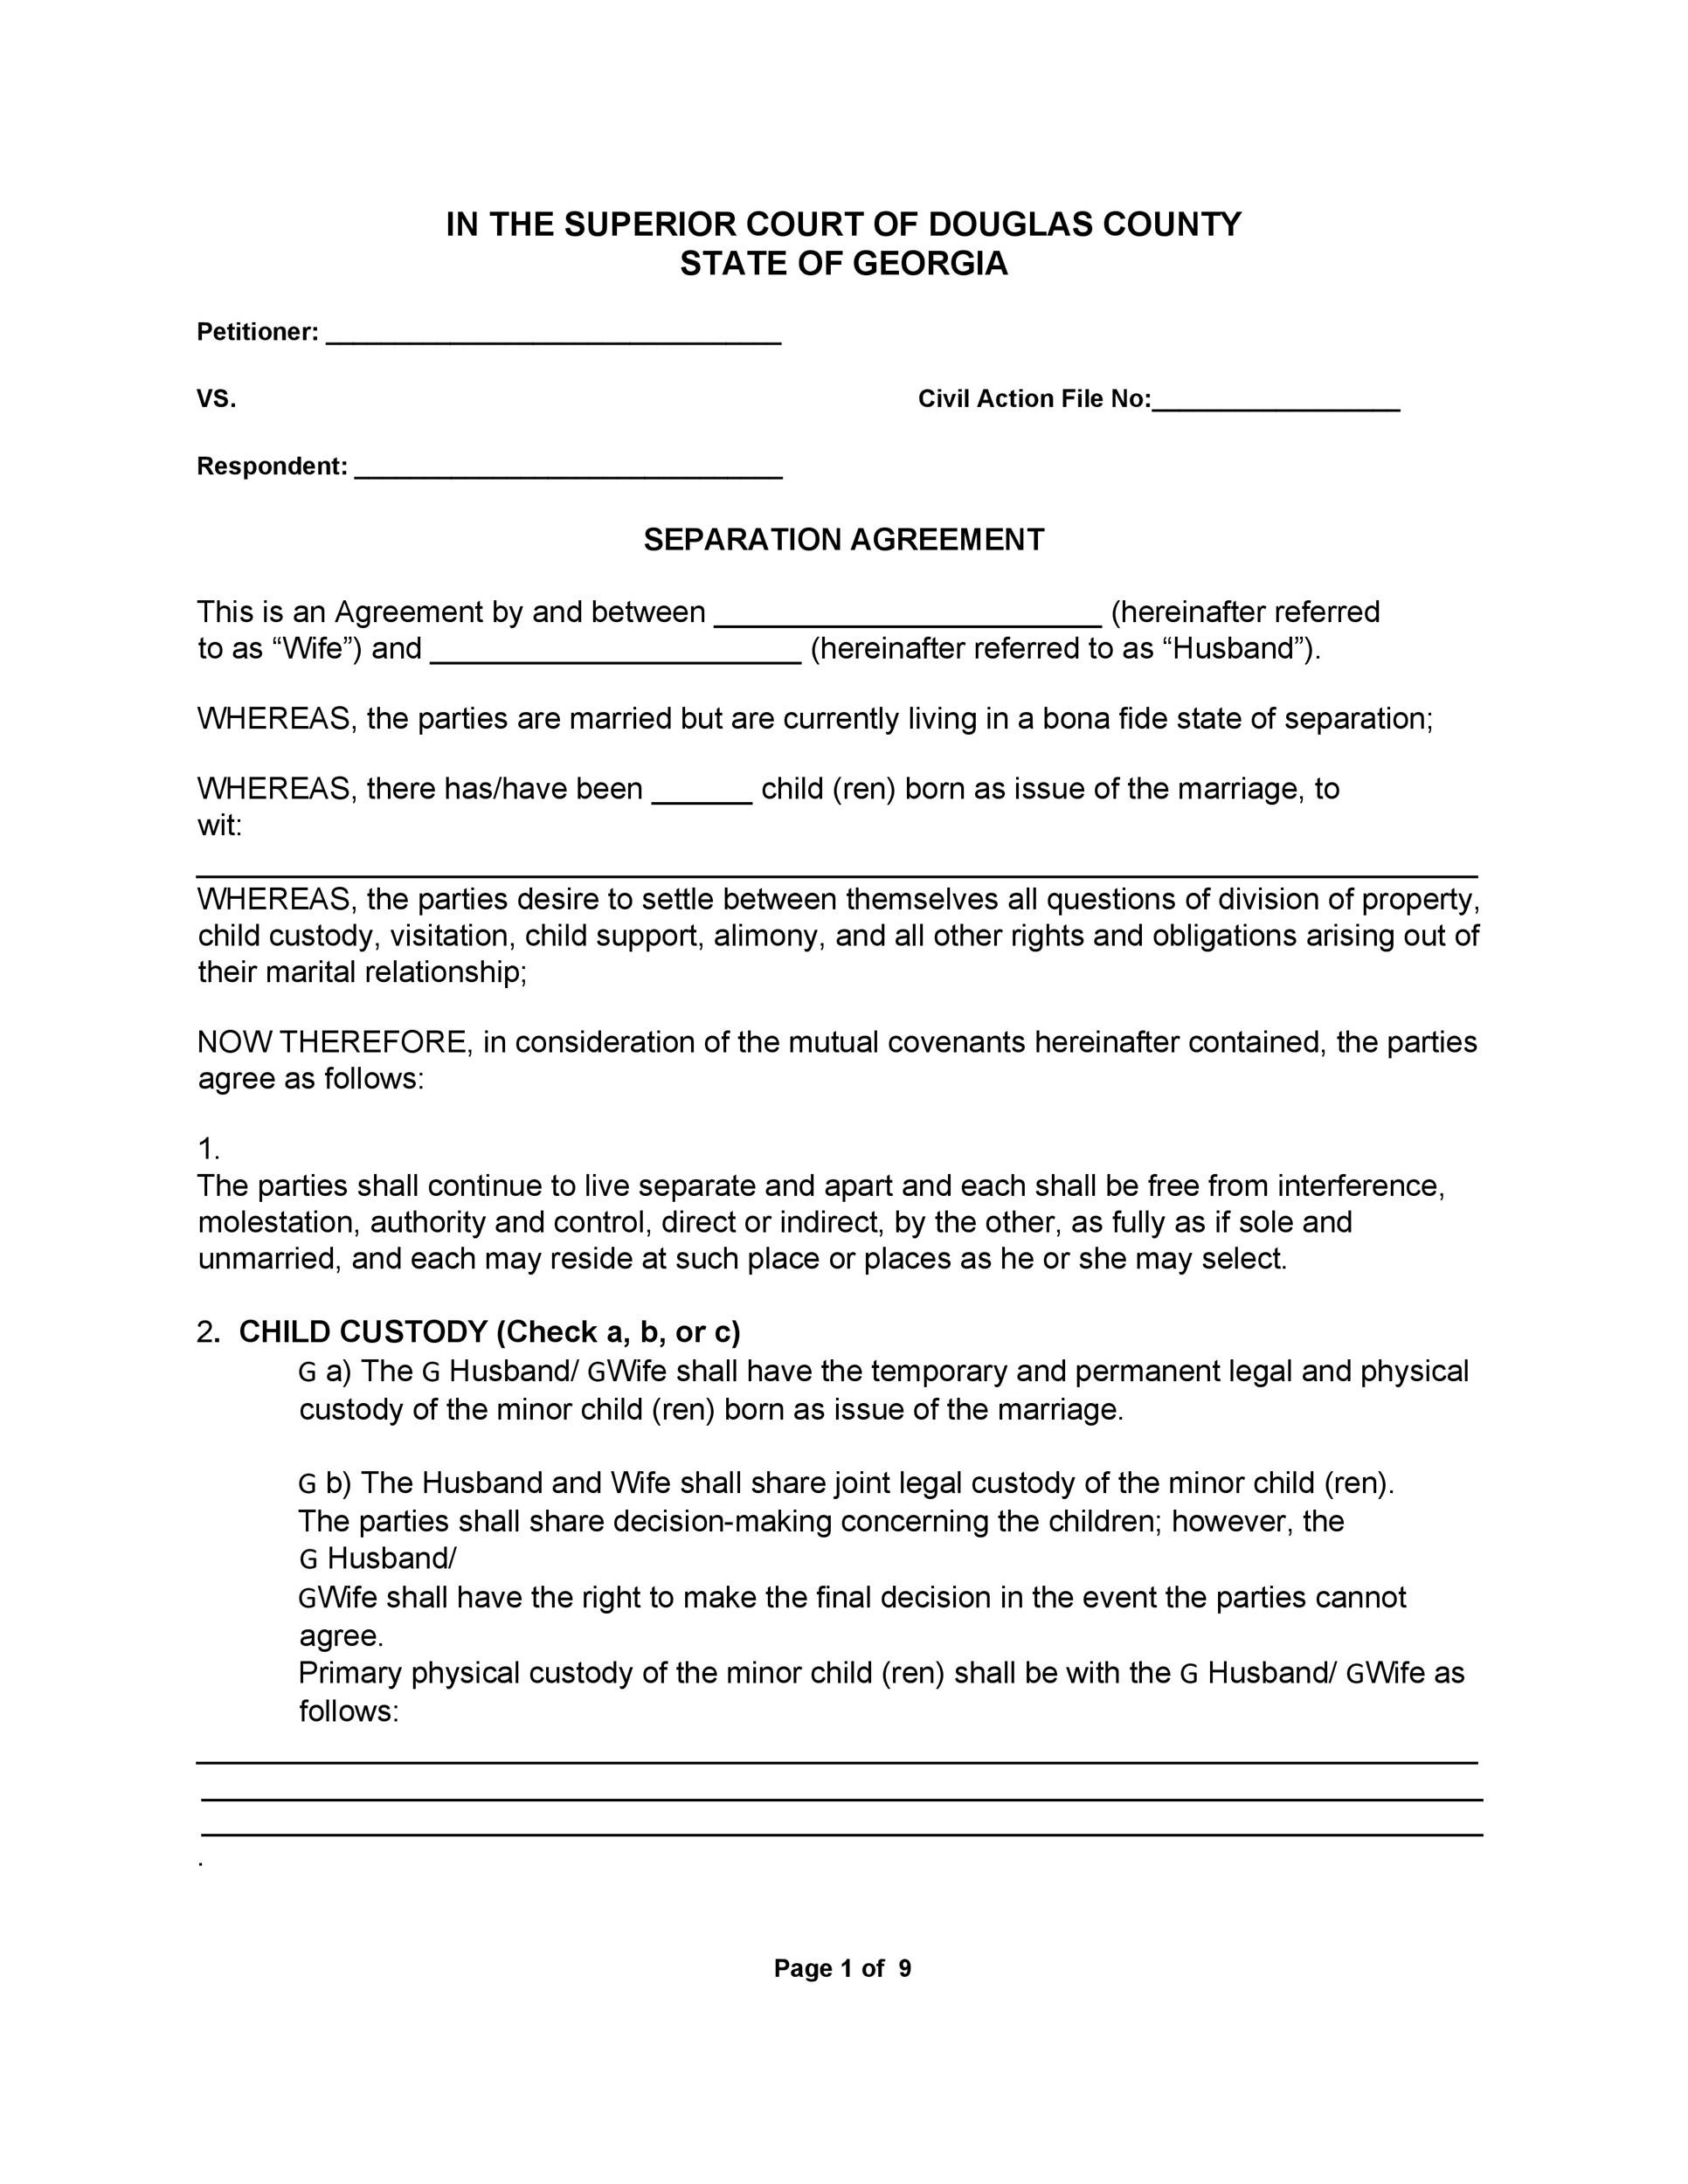 43 Official Separation Agreement Templates / Letters / Forms ᐅ TemplateLab